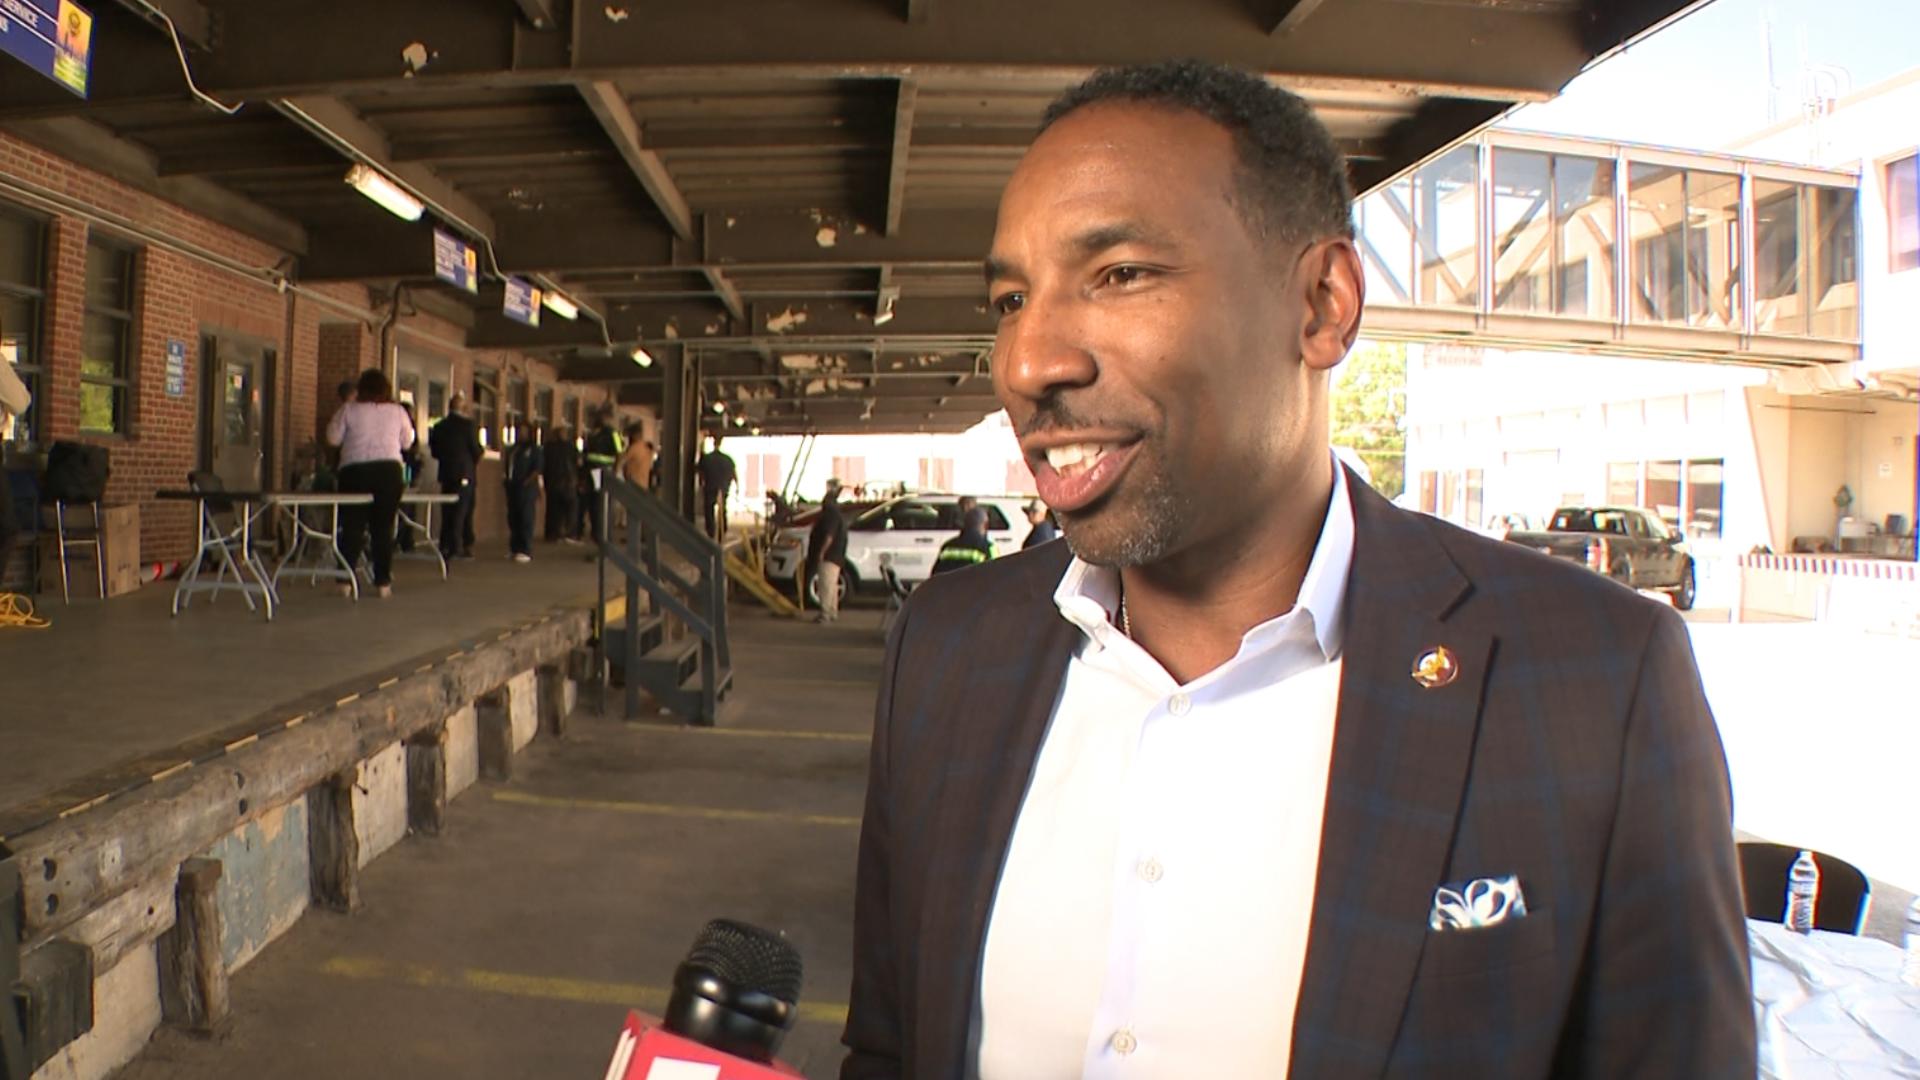 Mayor Andre Dickens spoke 1:1 with 11Alive's Faith Jessie about the Atlanta water crisis and what the city is doing to help residents and businesses